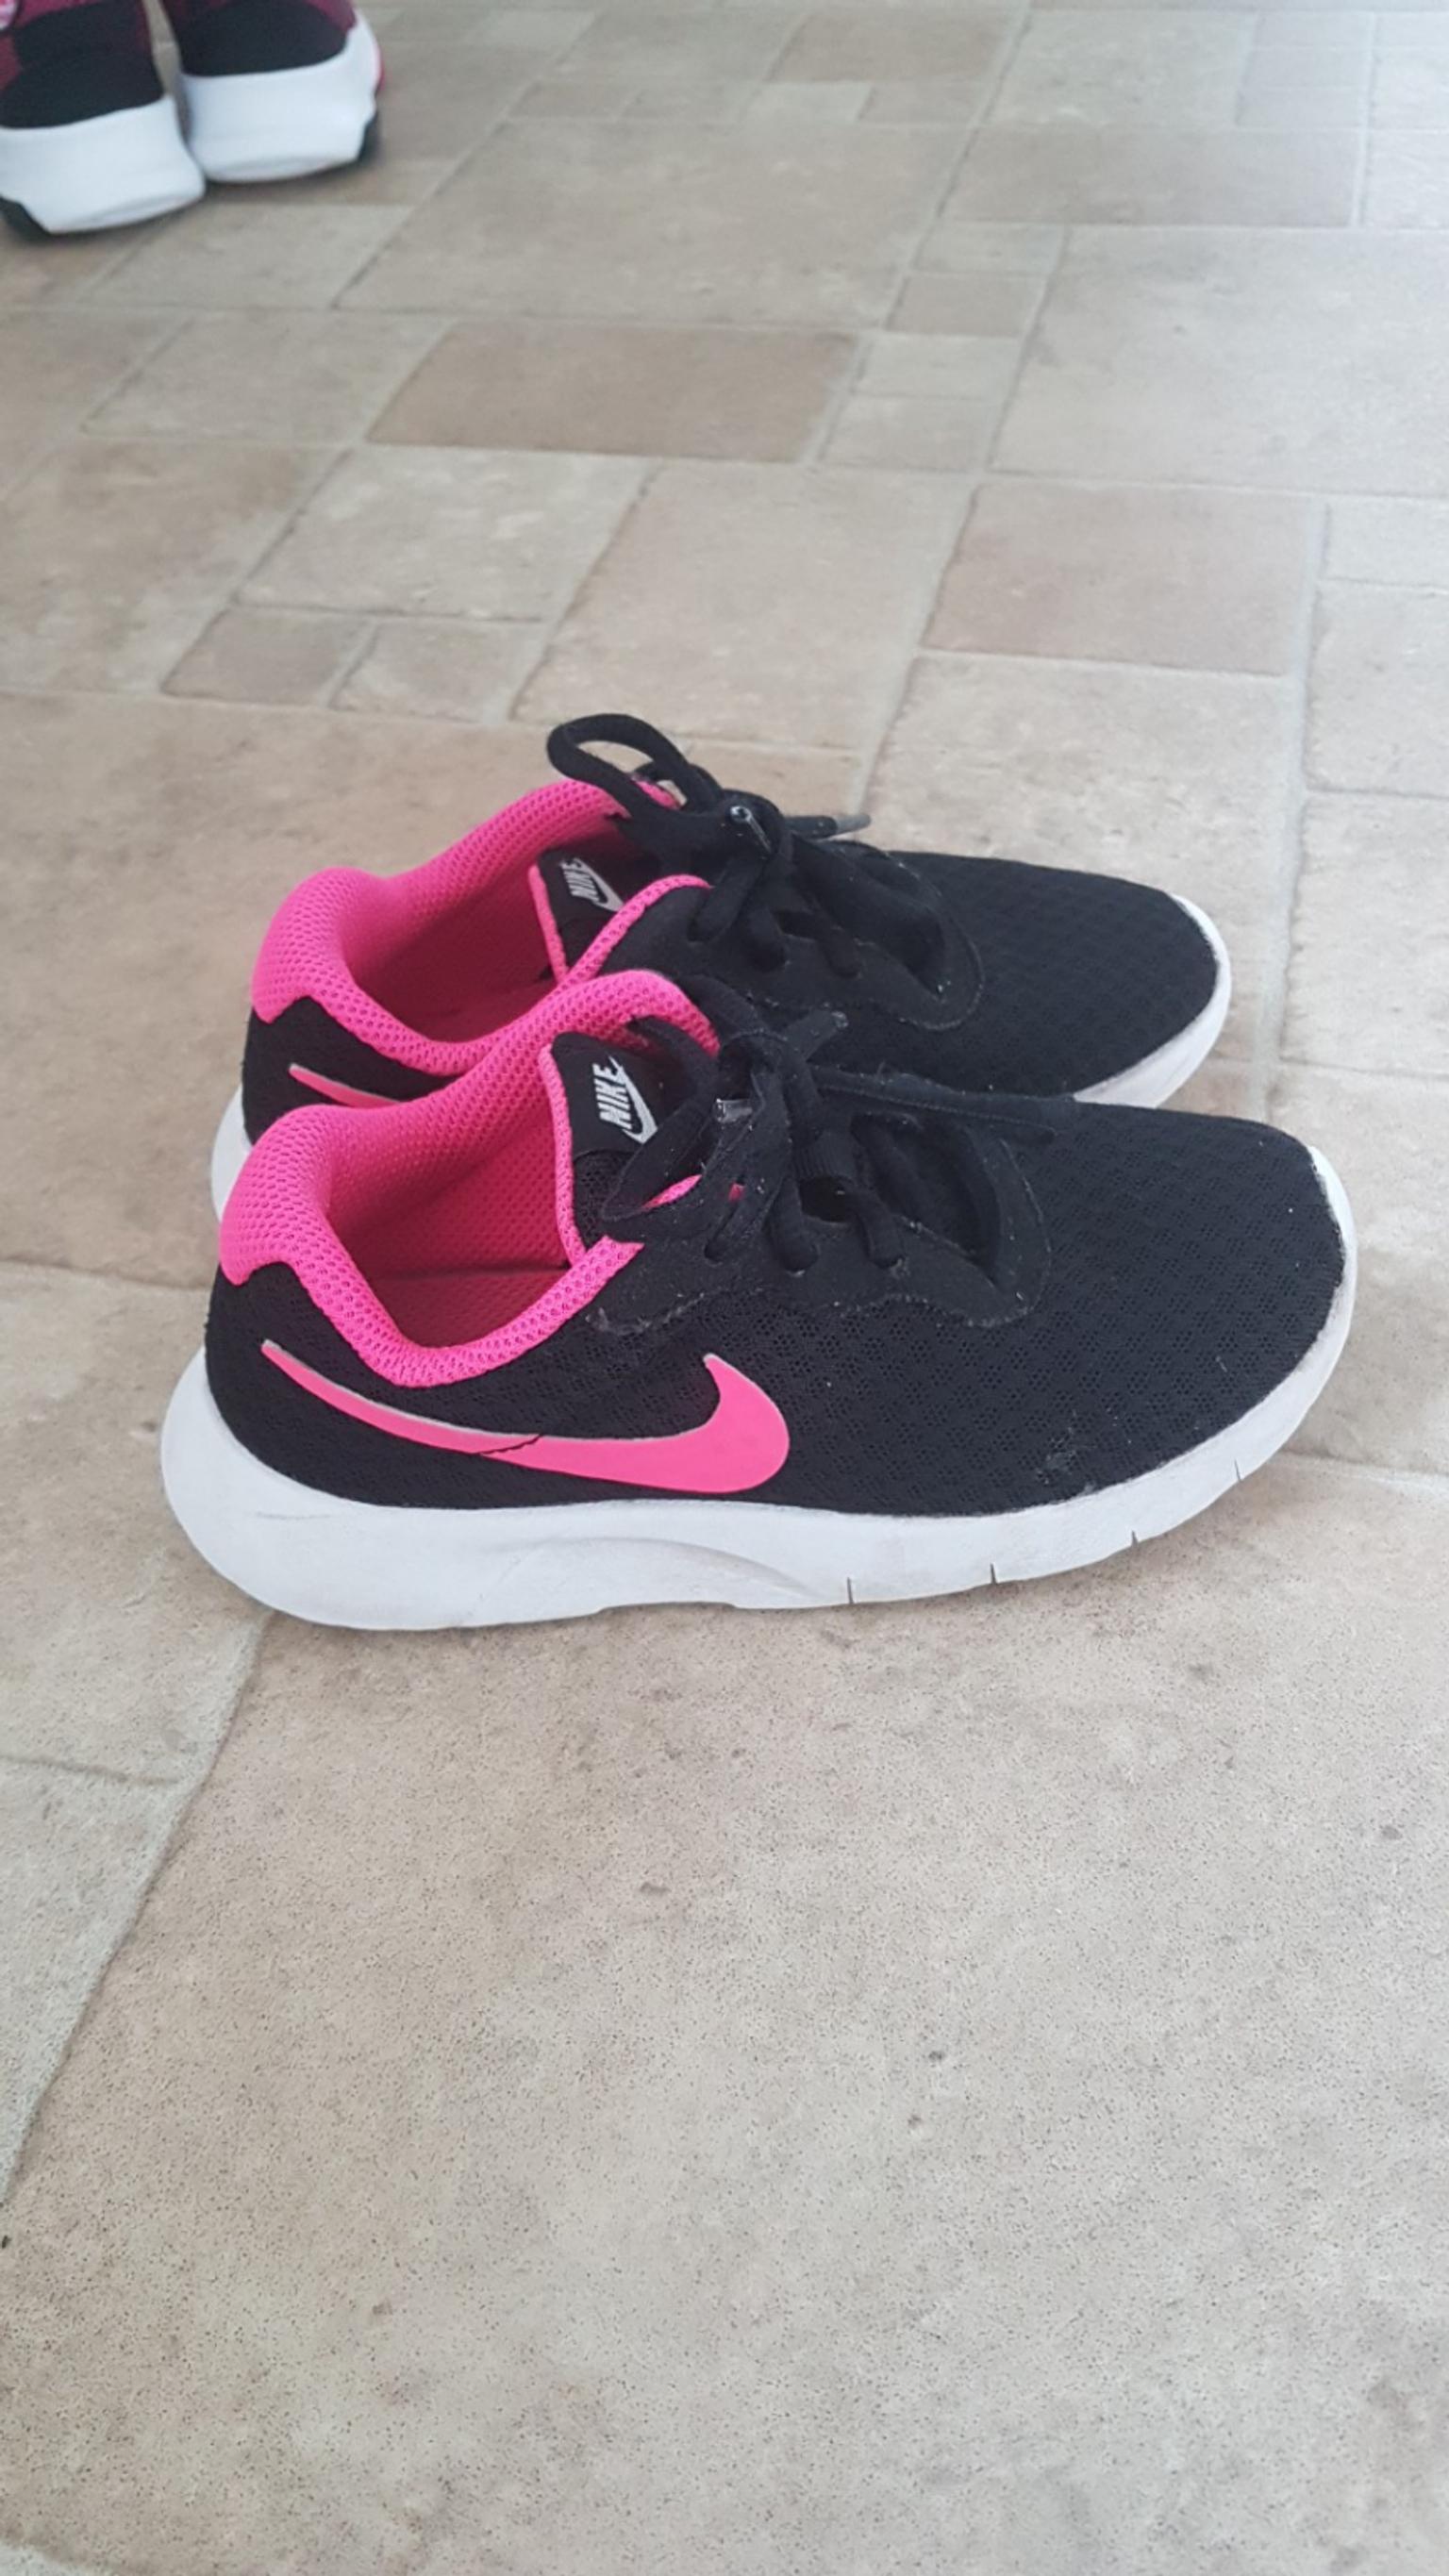 childrens size 11 nike trainers